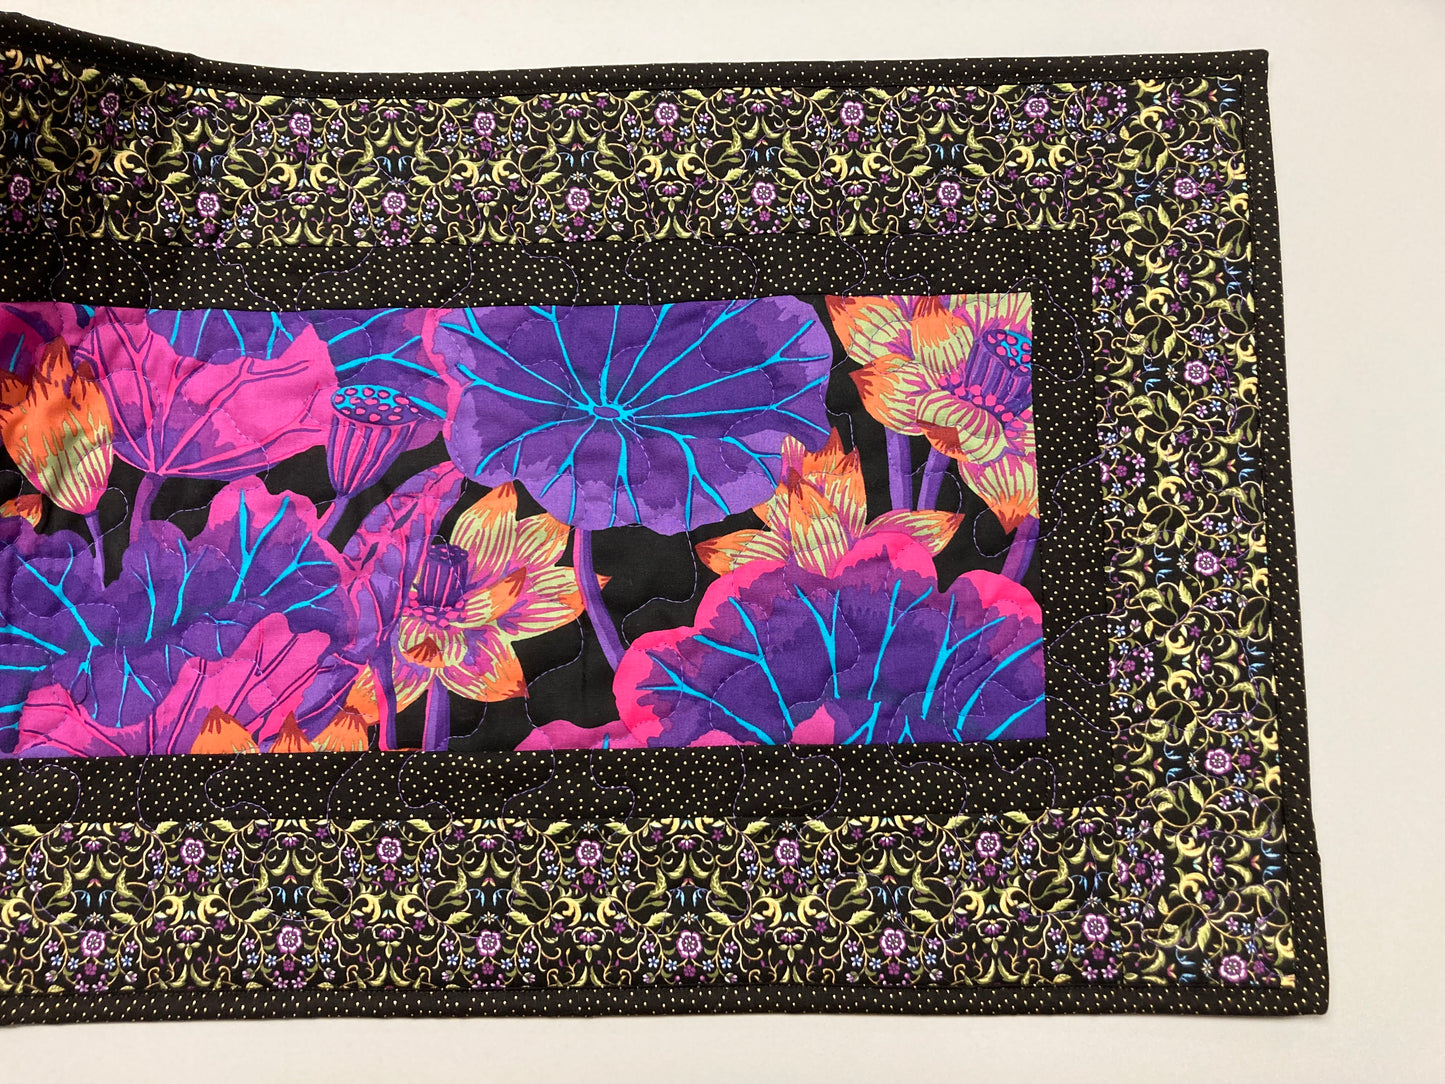 Quilted Table Runner Kaffe Fassett Purple Pink and Black Flowers Summer Decor, Reversible, 14x48" Dining Coffee Table Runner, Bright Bold